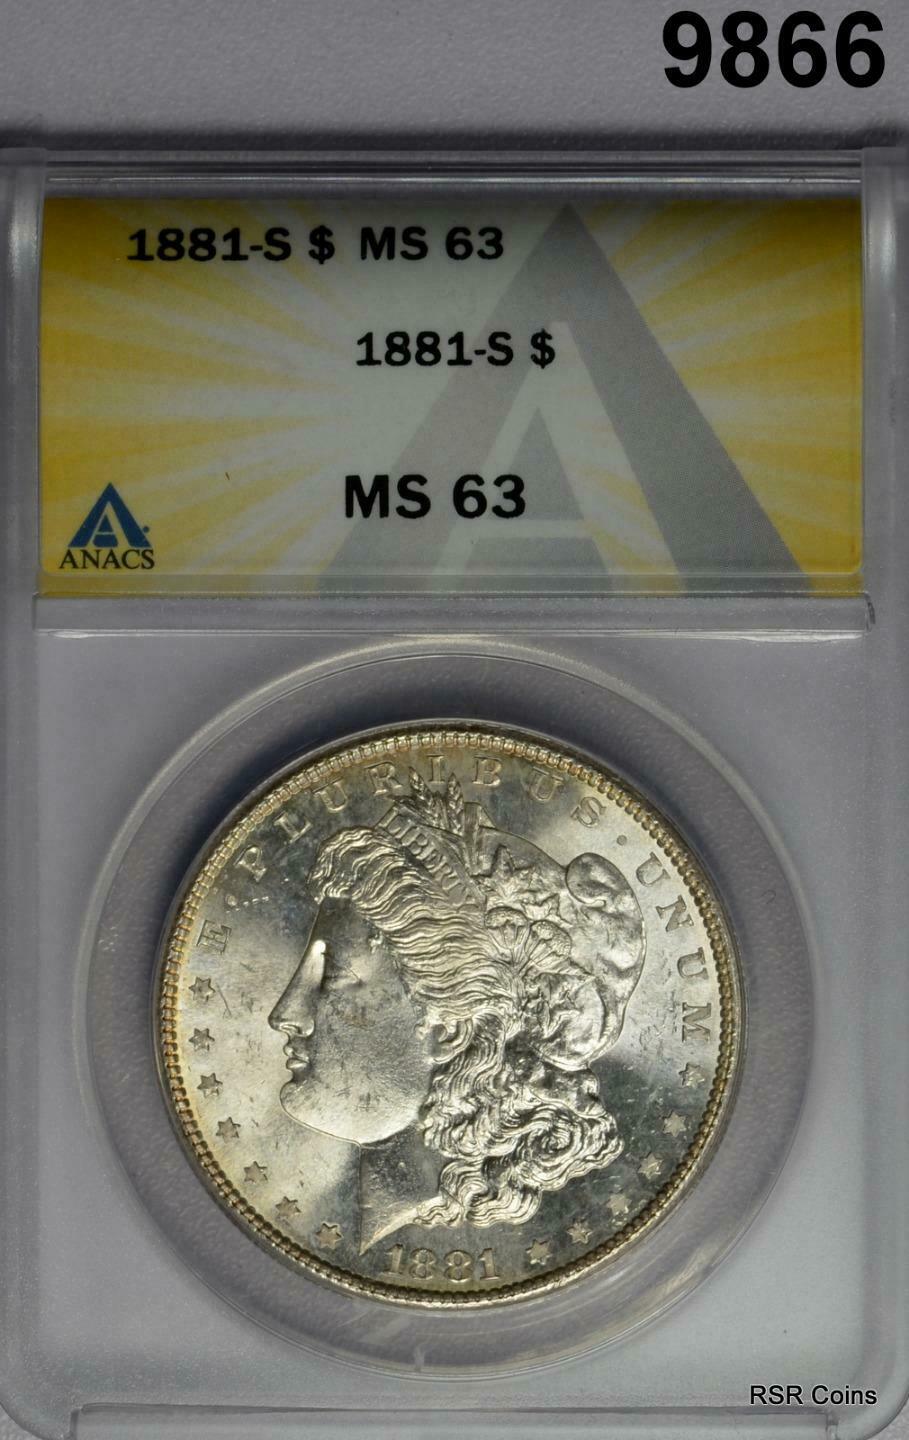 1881 S MORGAN SILVER DOLLAR ANACS CERTIFIED MS63 FLASHY TONED REVERSE #9866